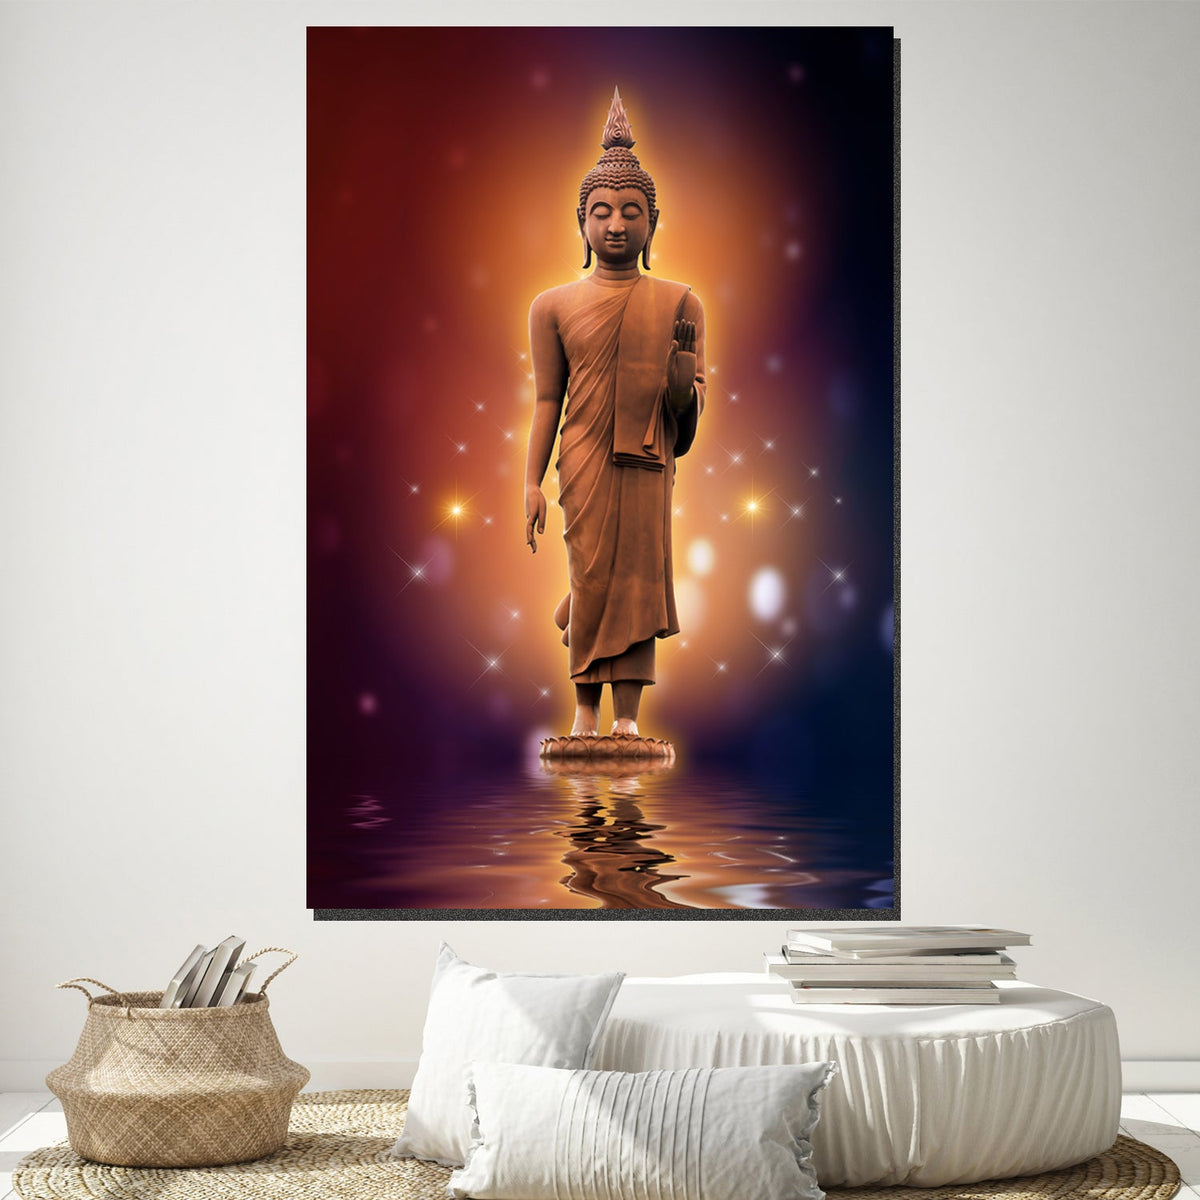 https://cdn.shopify.com/s/files/1/0387/9986/8044/products/BuddhaonWaterCanvasArtprintStretched-3.jpg